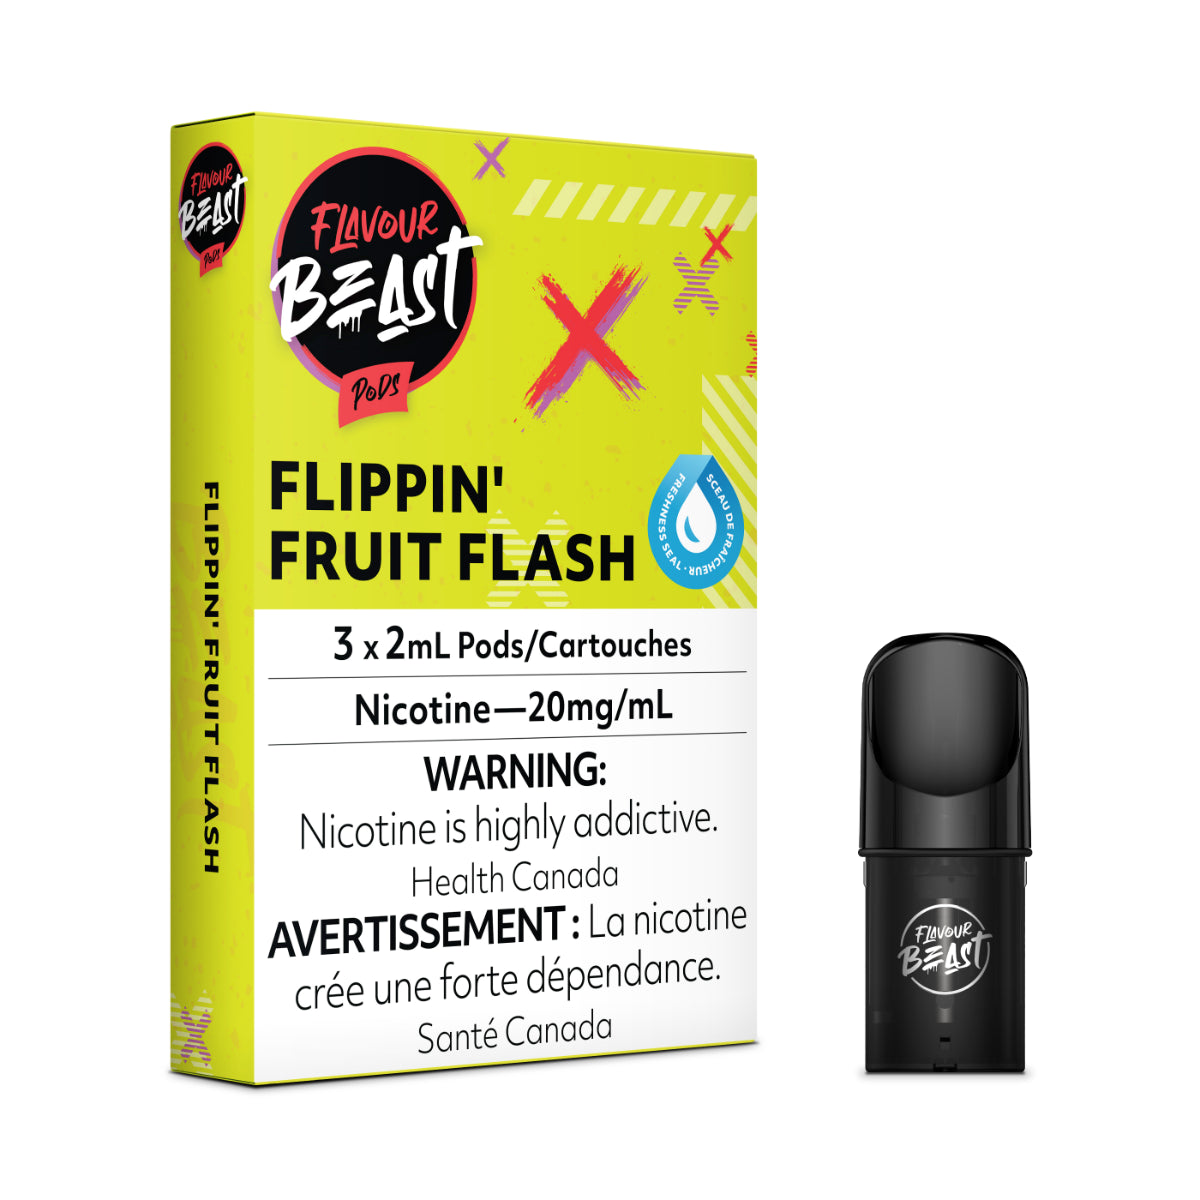 Flippin Fruit Flash - Flavour Beast Pod Pack - 20mg - EXCISED